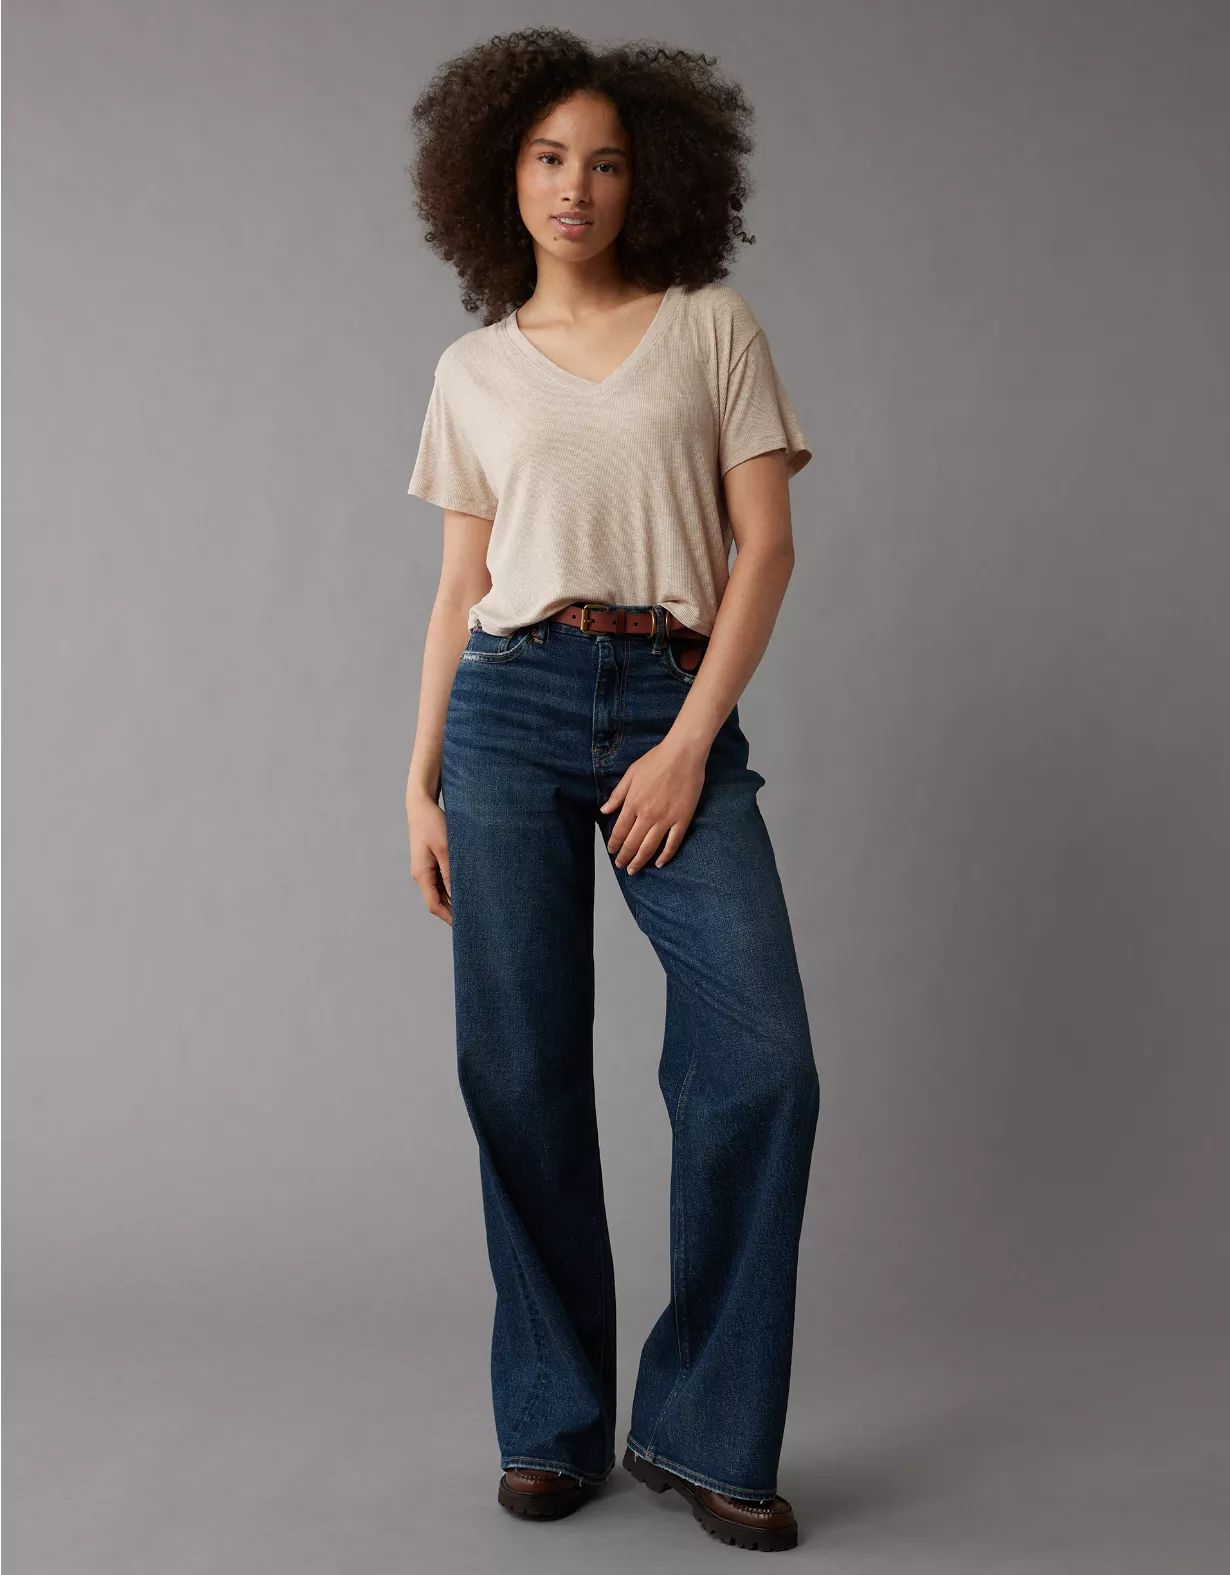 AE Soft & Sexy Cropped V-Neck T-Shirt | American Eagle Outfitters (US & CA)